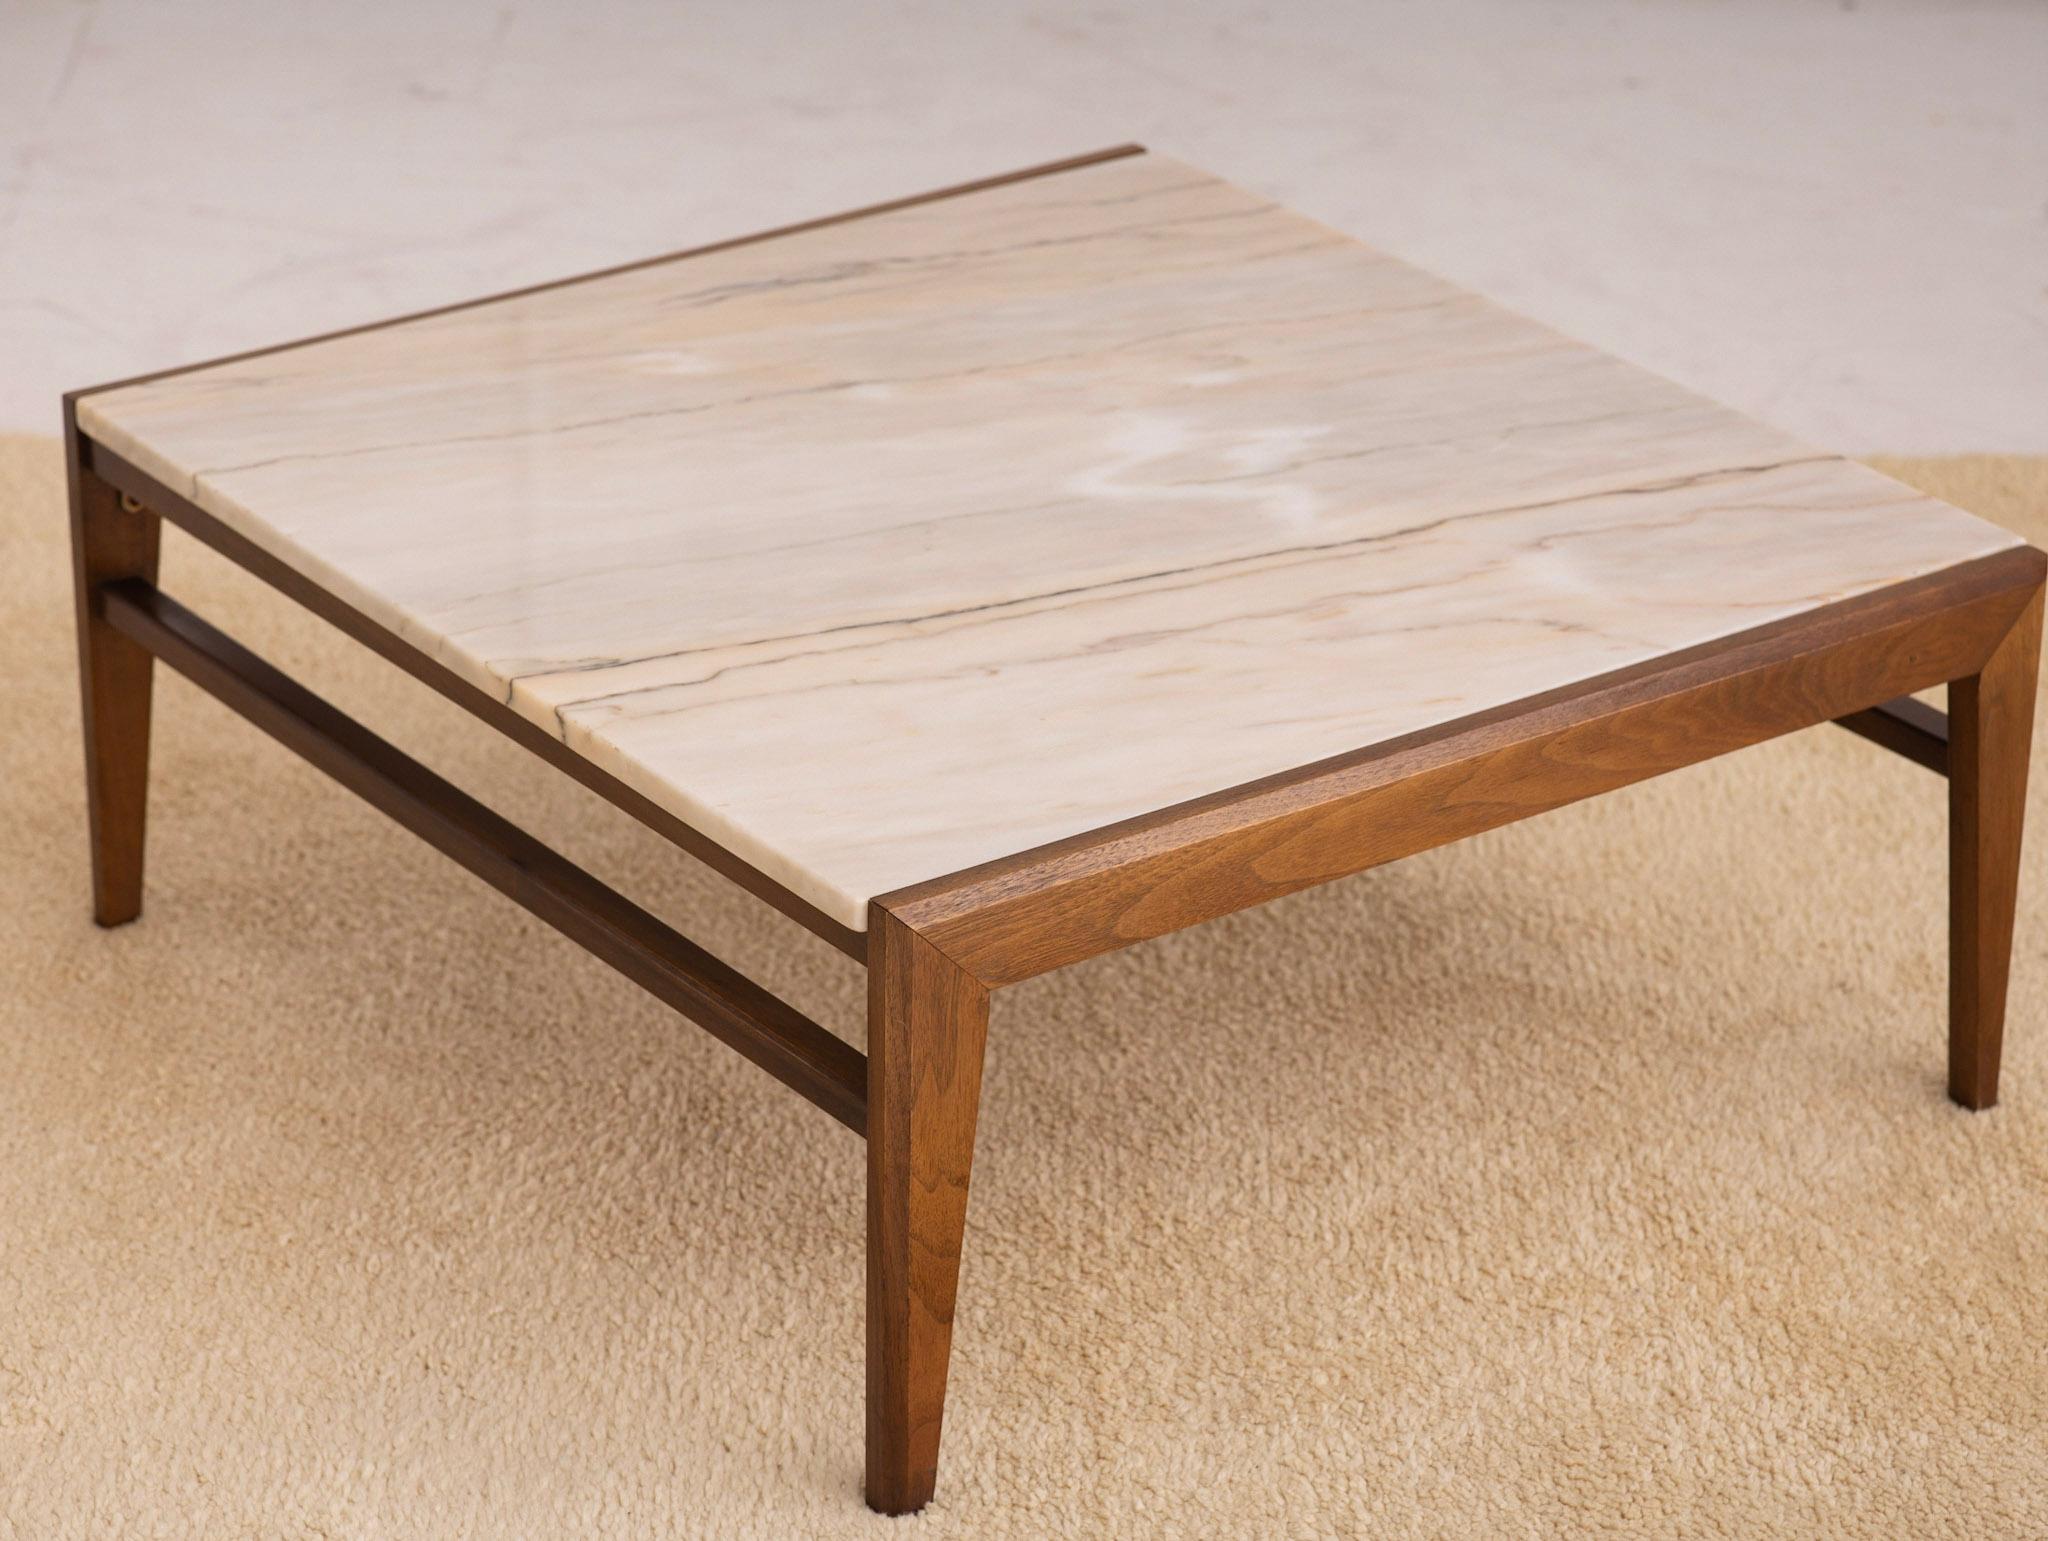 Square coffee table featuring classic mid century lines. Solid marble top sets into walnut frame. Beautiful marble variations with veining ranging from creamy beiges to light grays.